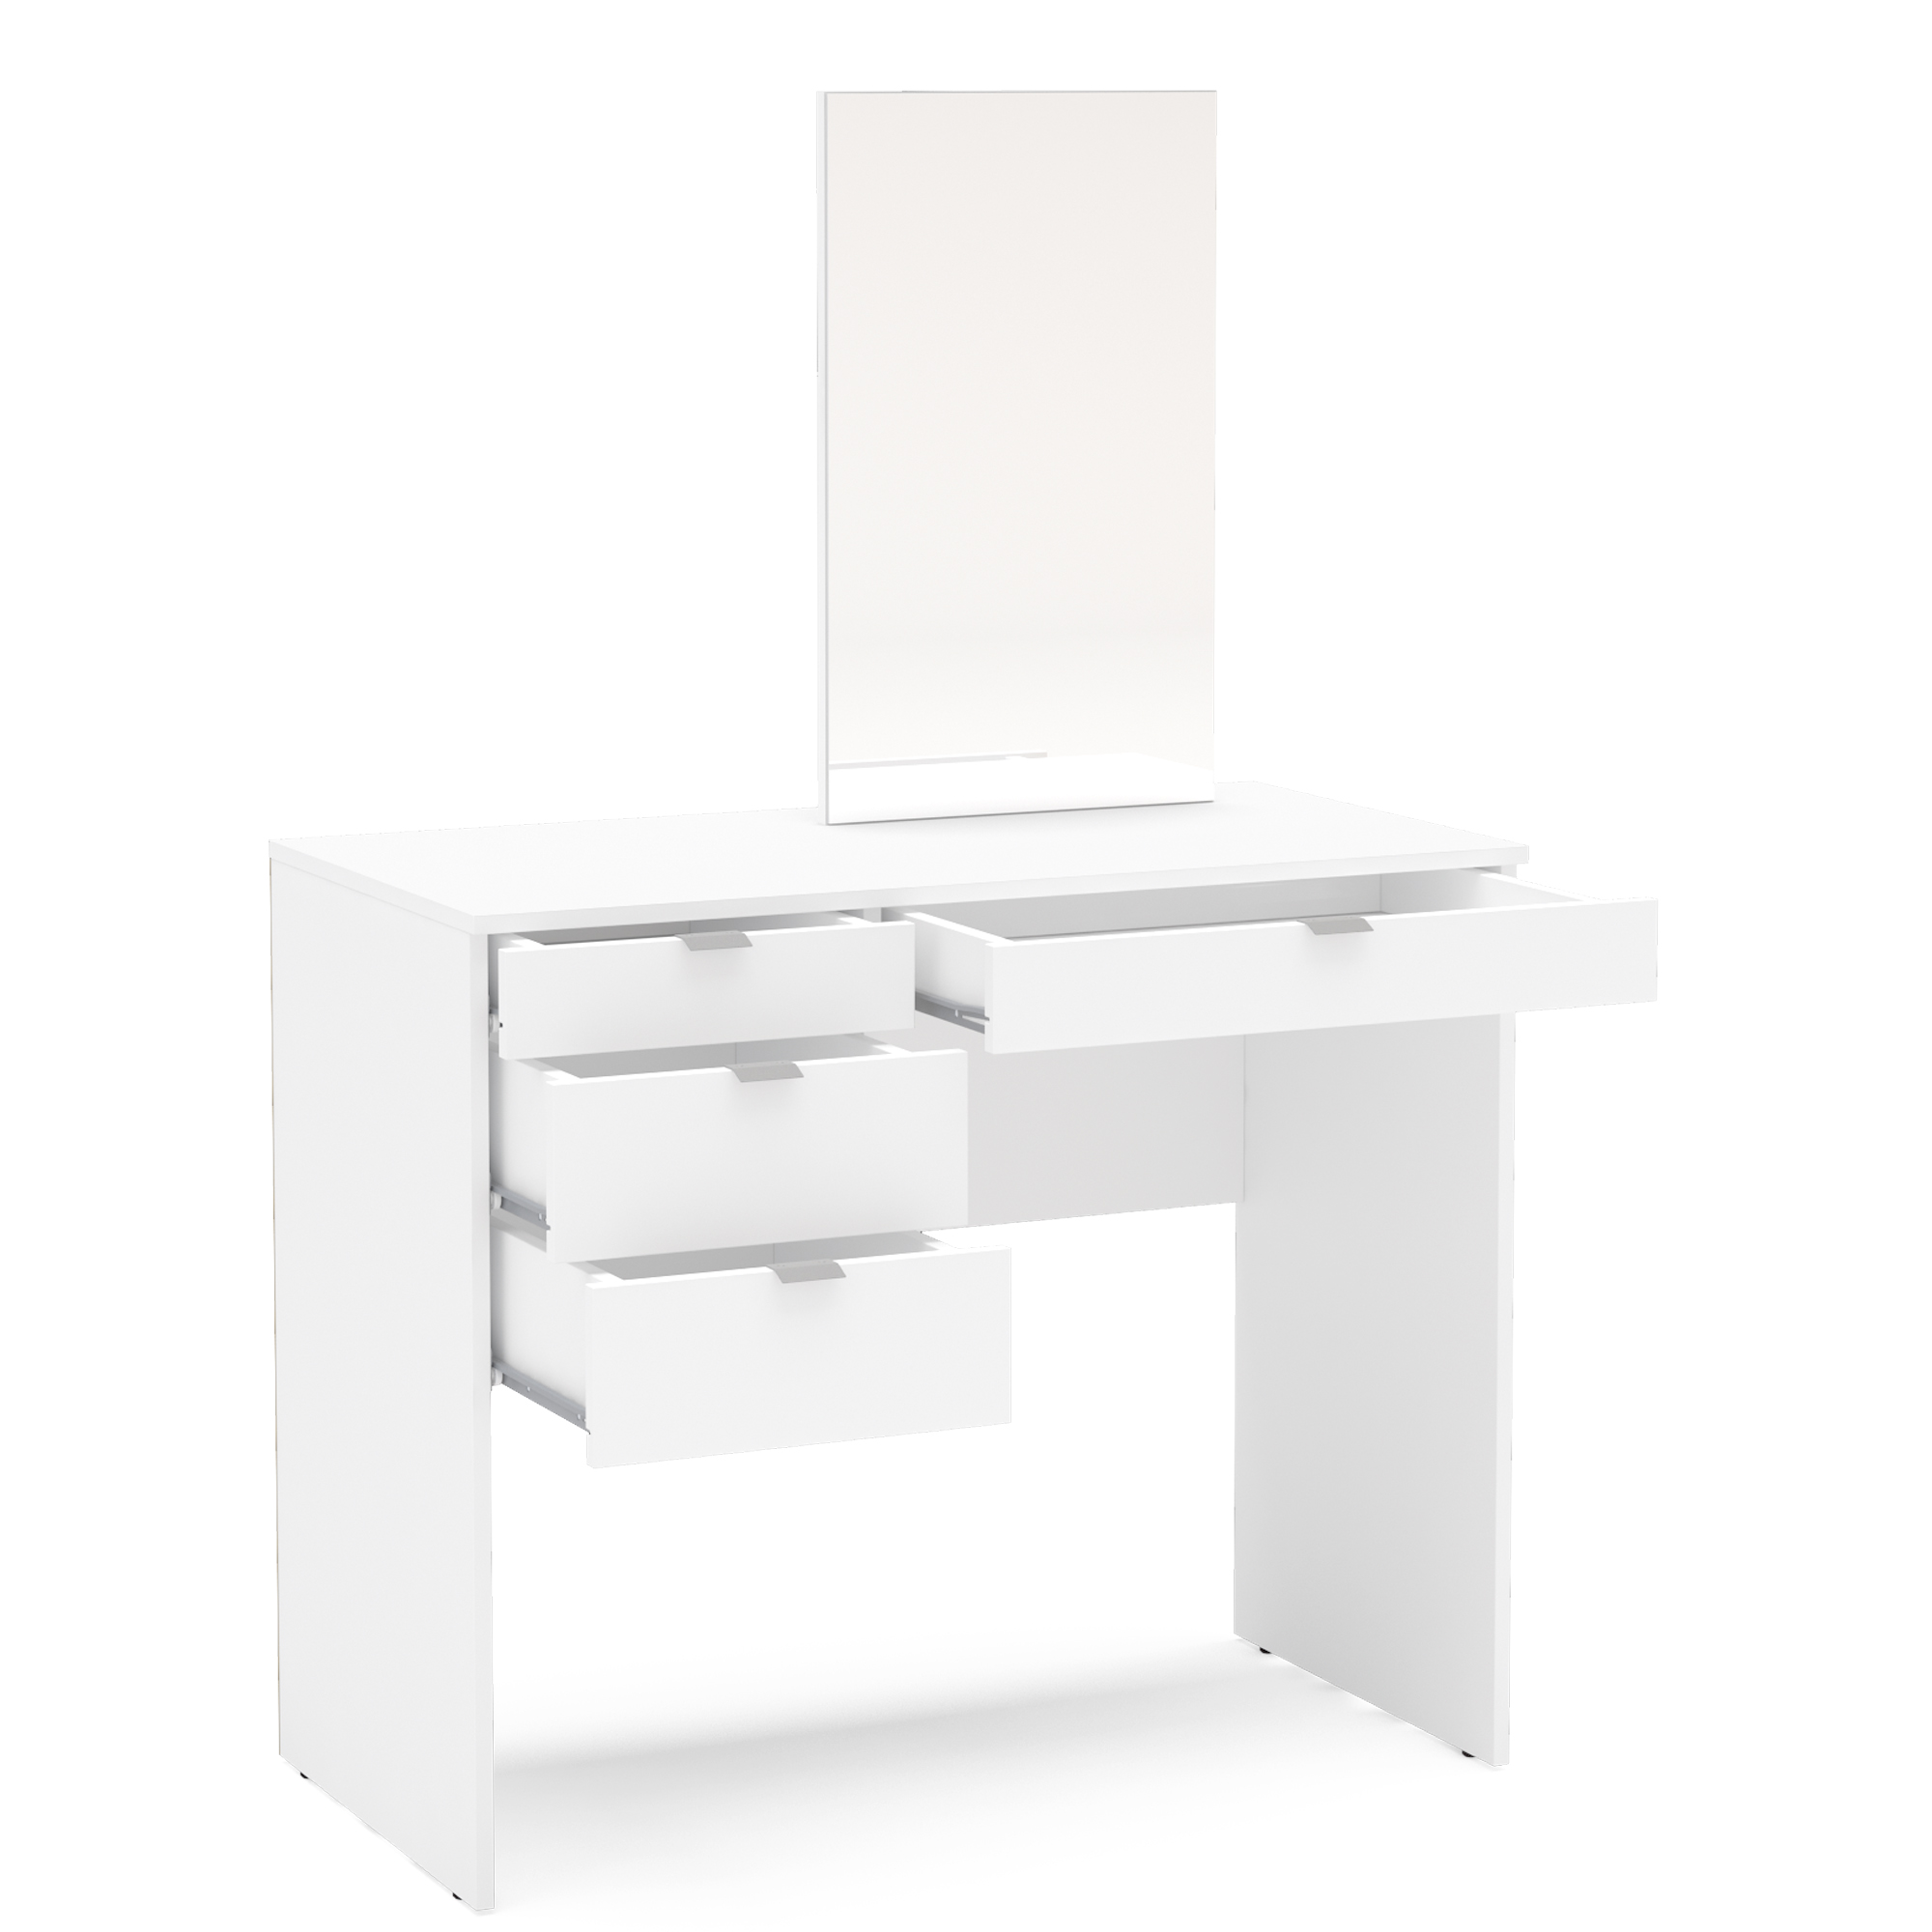 Boahaus Maia Modern Vanity Table, White Finish, for Bedroom - image 4 of 9